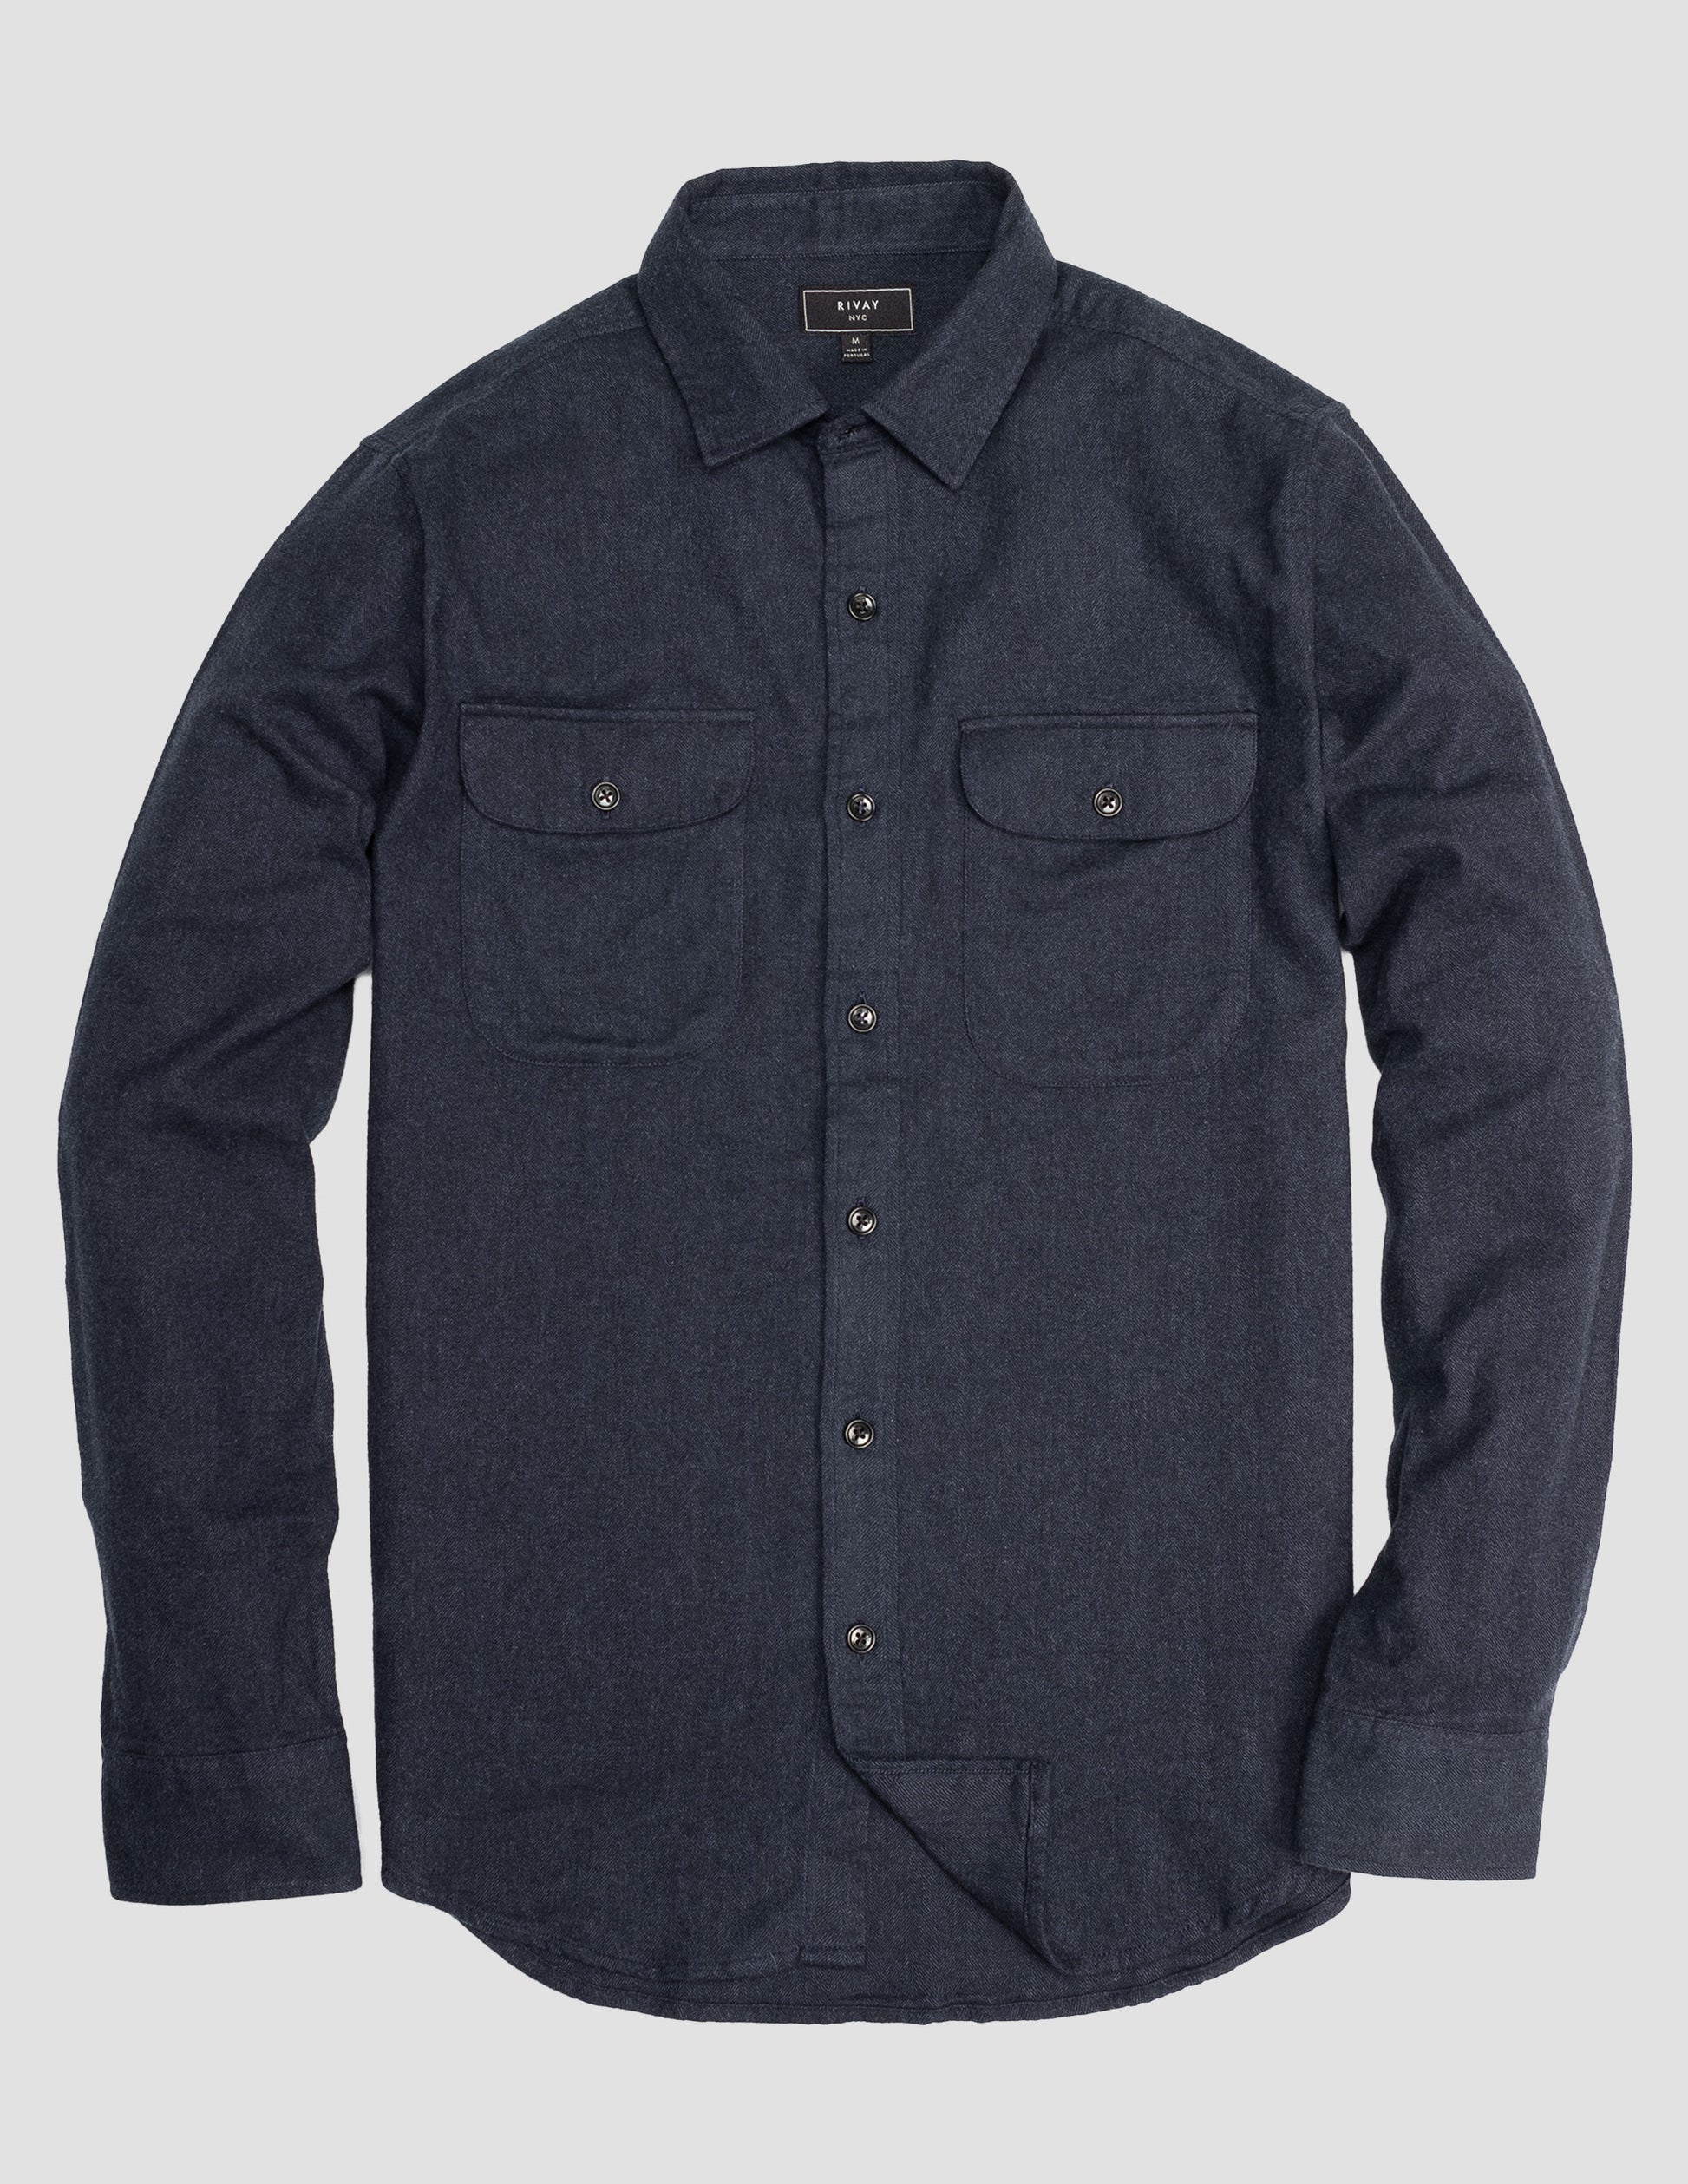 Rivay Miles Flannel Shirt in Navy